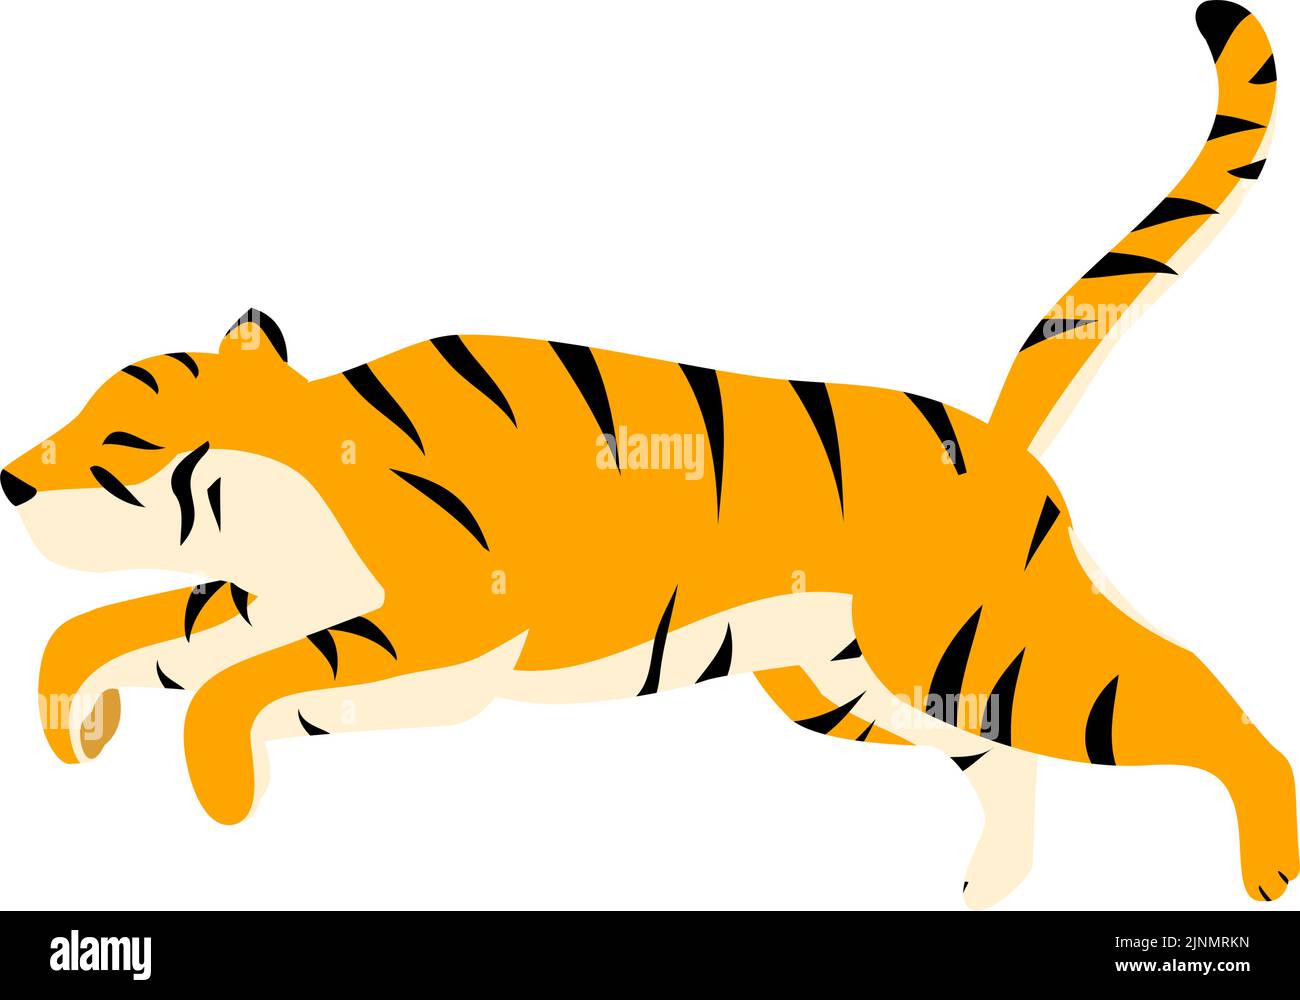 Simple tiger pose illustration, running and flying in the air Stock Vector